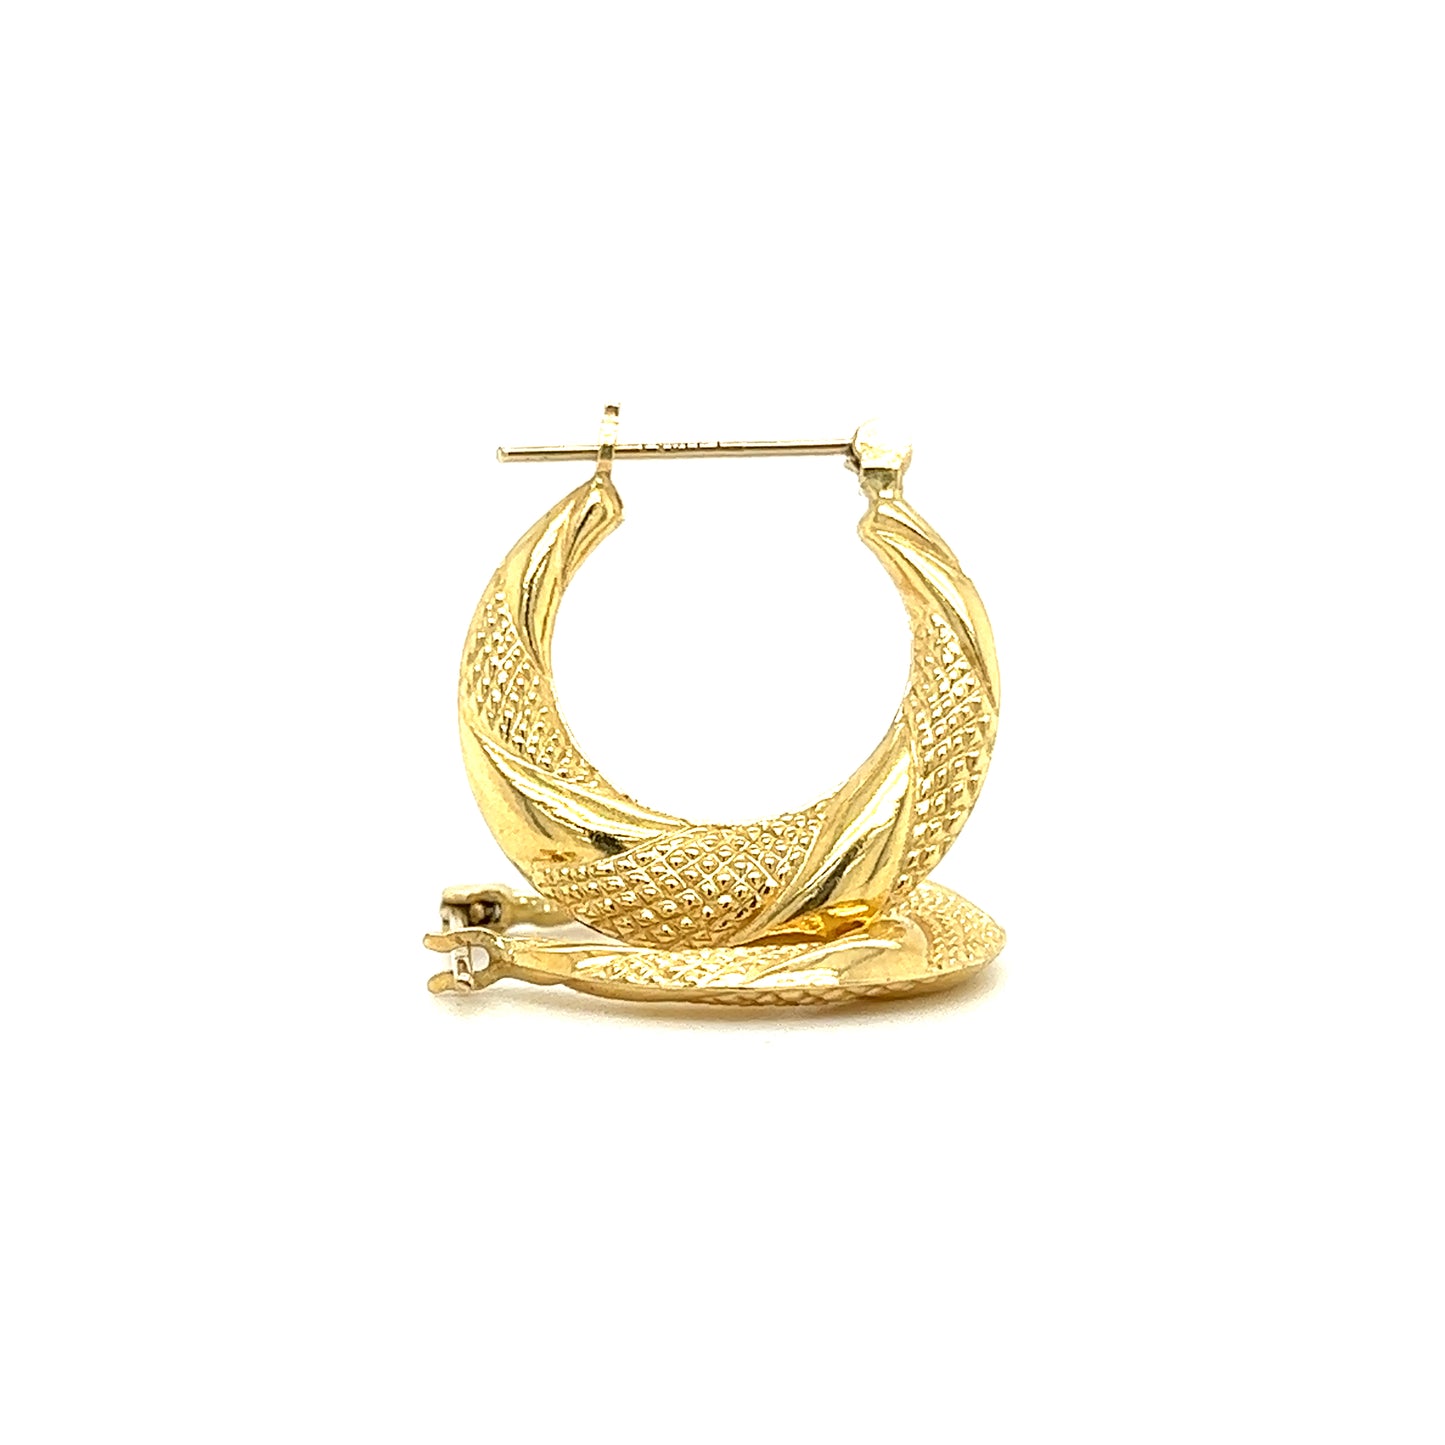 Copy of Hoop 20mm Earrings with Twisted Textured Pattern in 14K Yellow Gold 